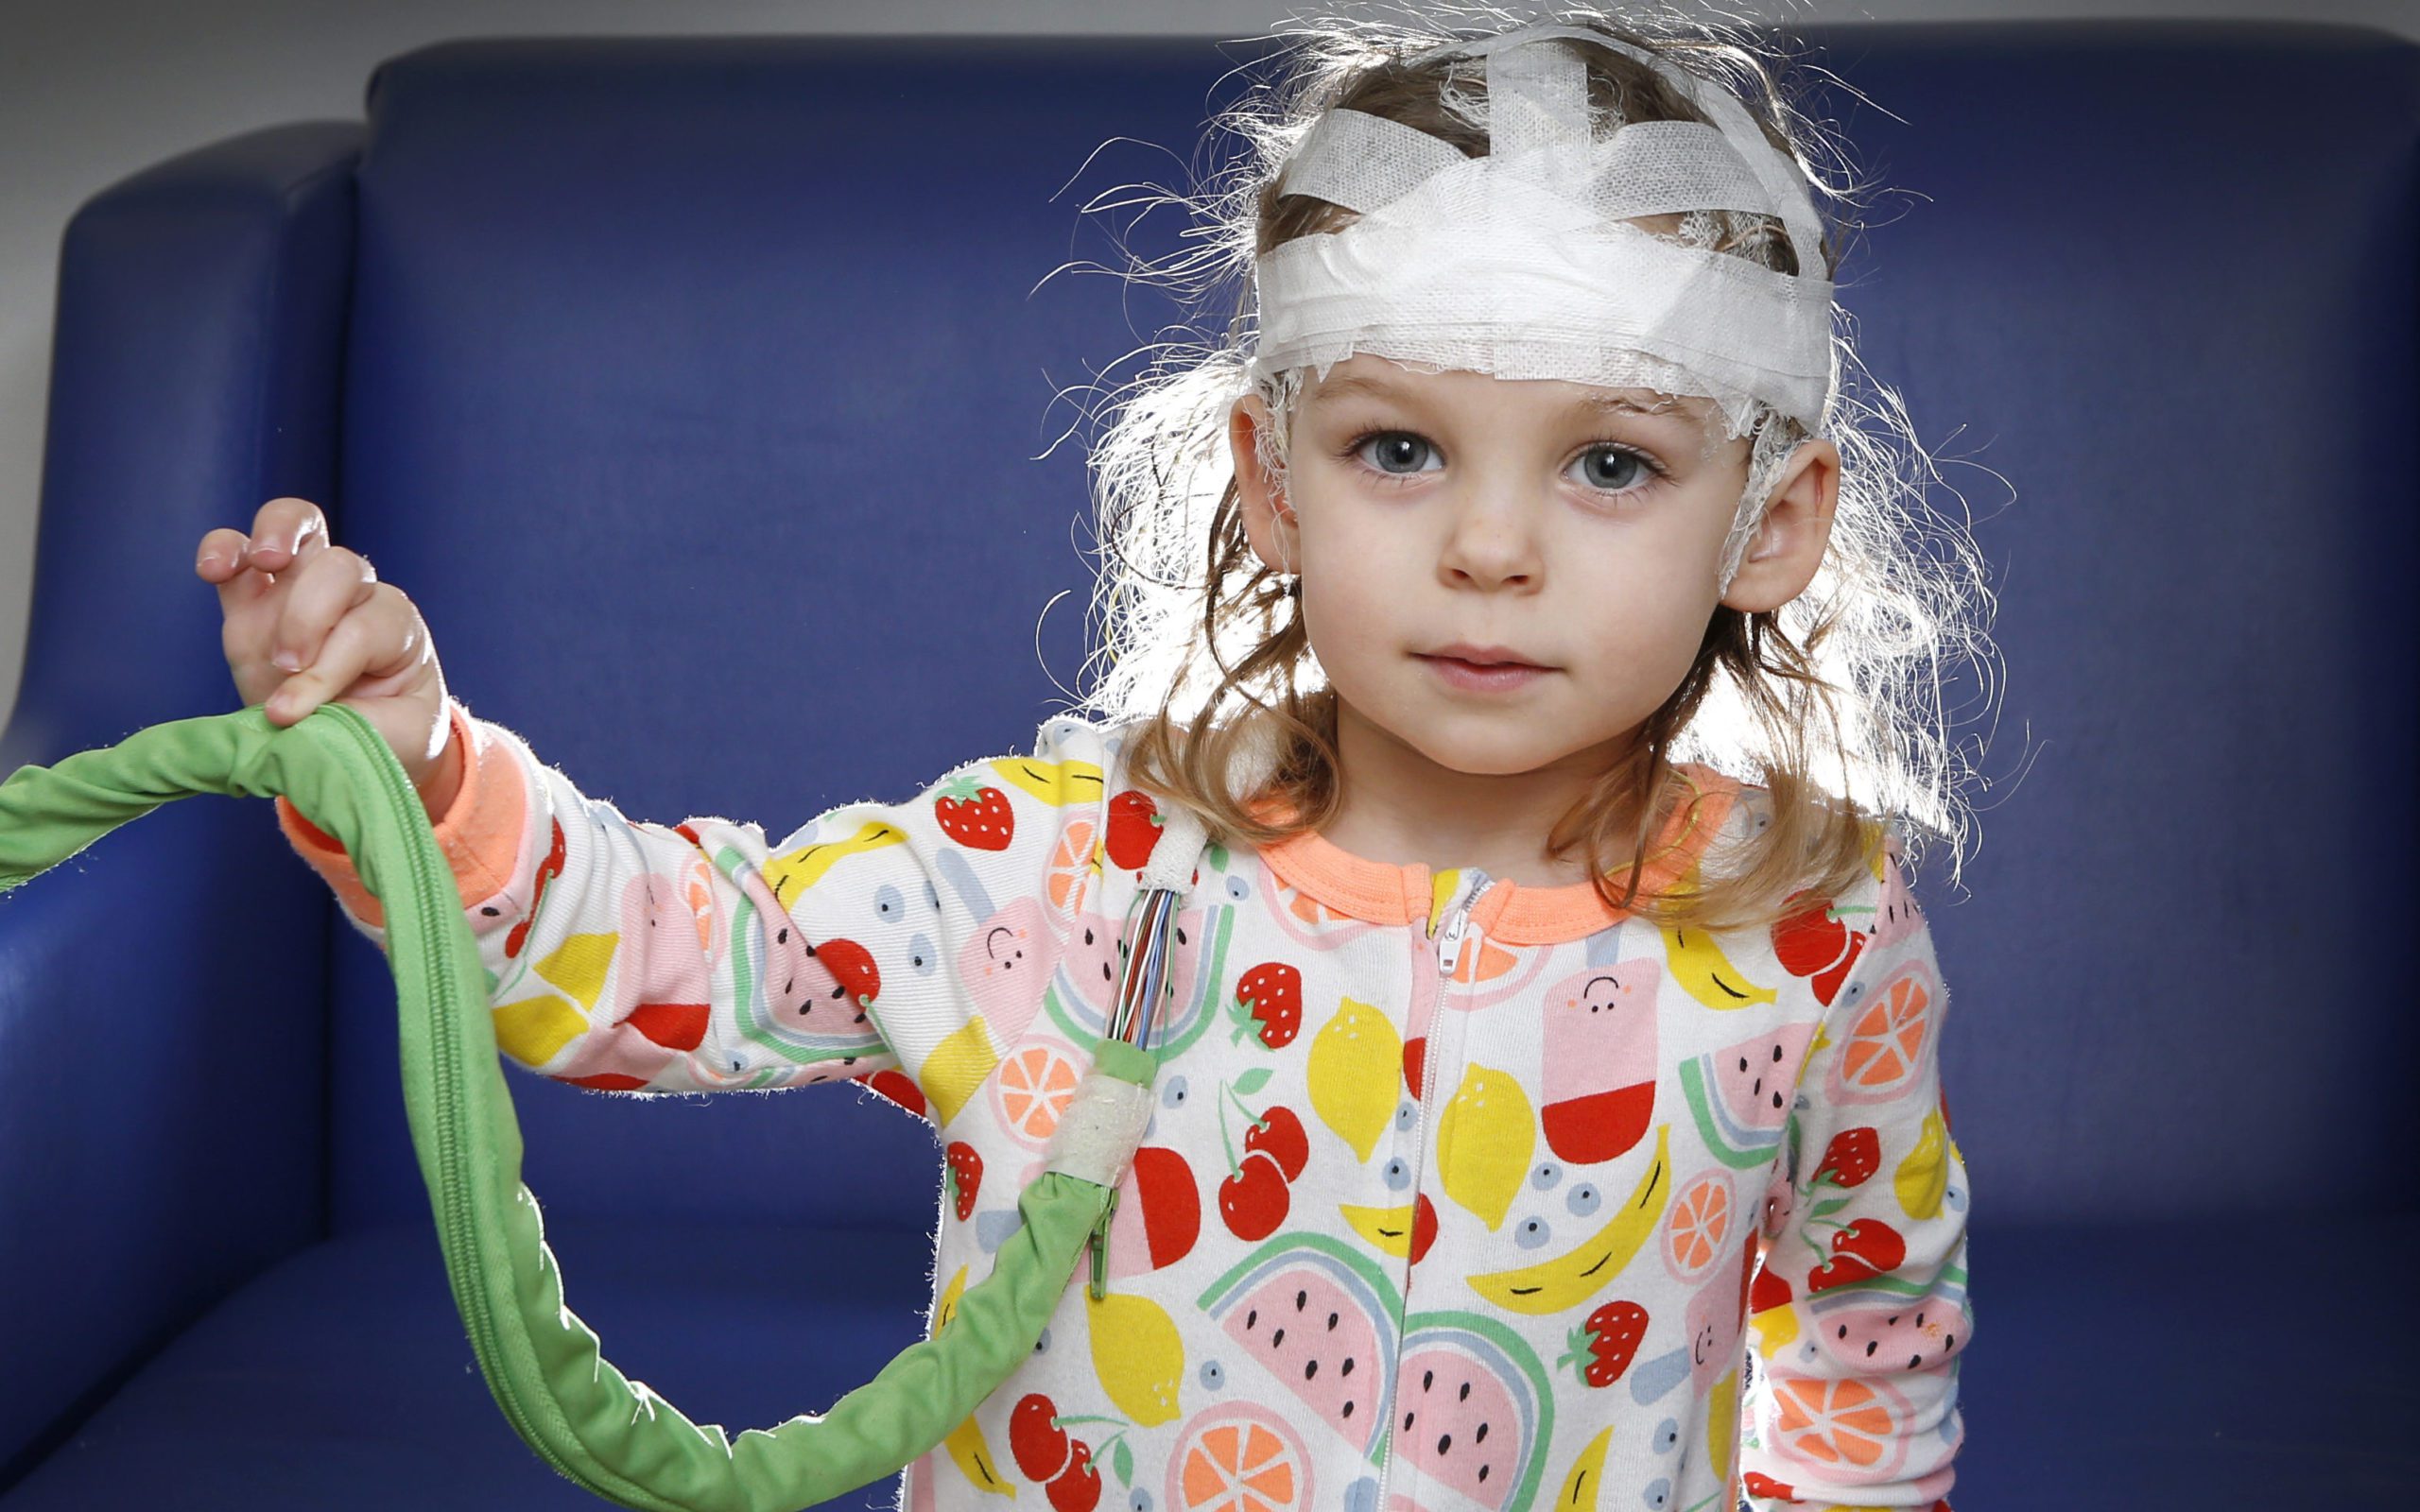 Piper, aged 2, with electrodes taped to her head